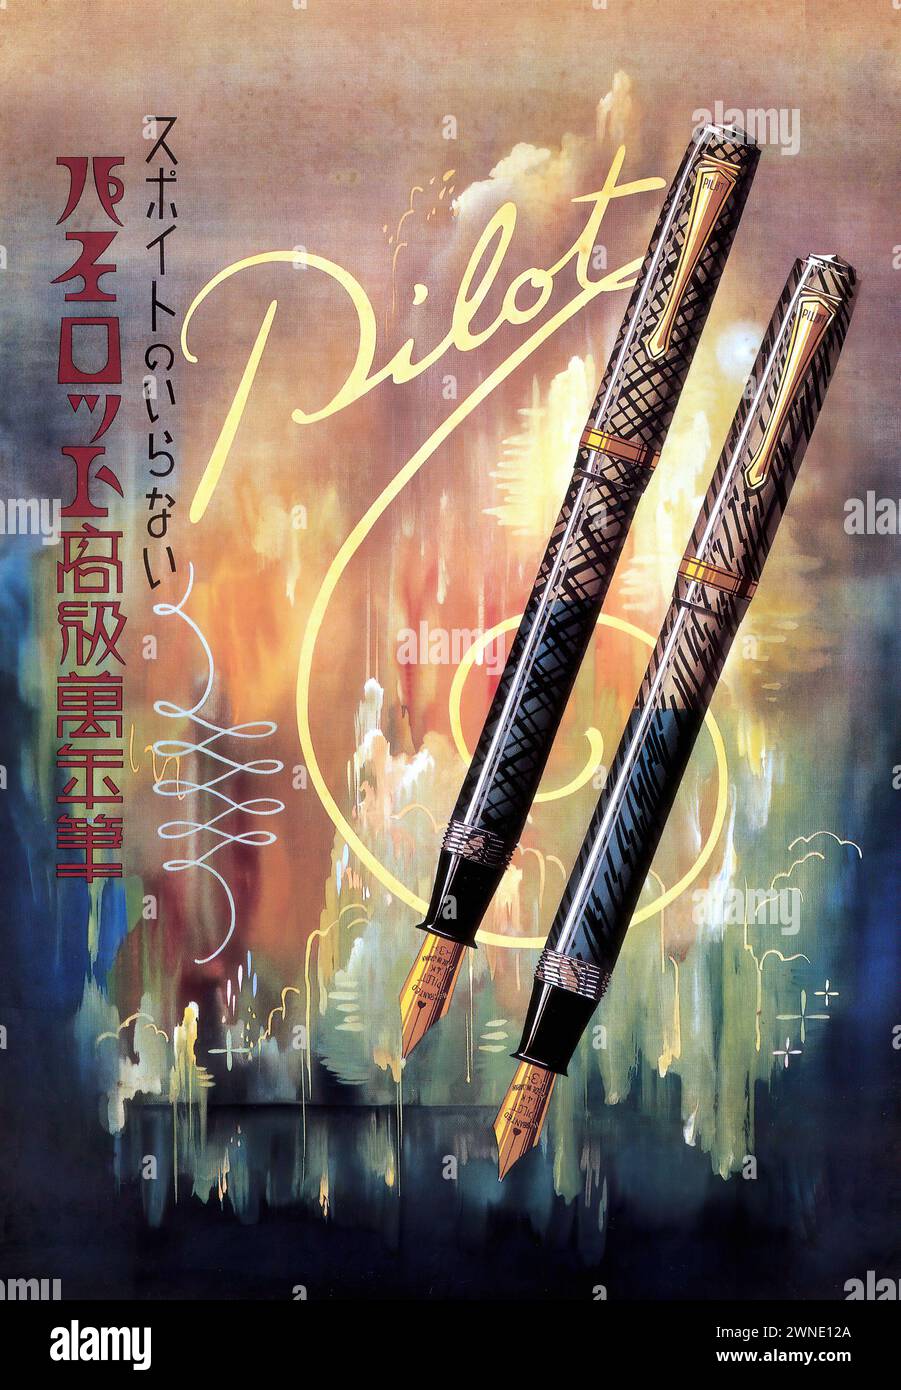 Vintage Advertising featuring two Pilot fountain pens against a backdrop of an abstract cityscape with clouds and skyscrapers. The image highlights the elegance and craftsmanship of the pens, with a dreamlike quality to the illustration. The style is a mix of realism for the pens and expressionism for the background, common in 1930s advertising. Stock Photo